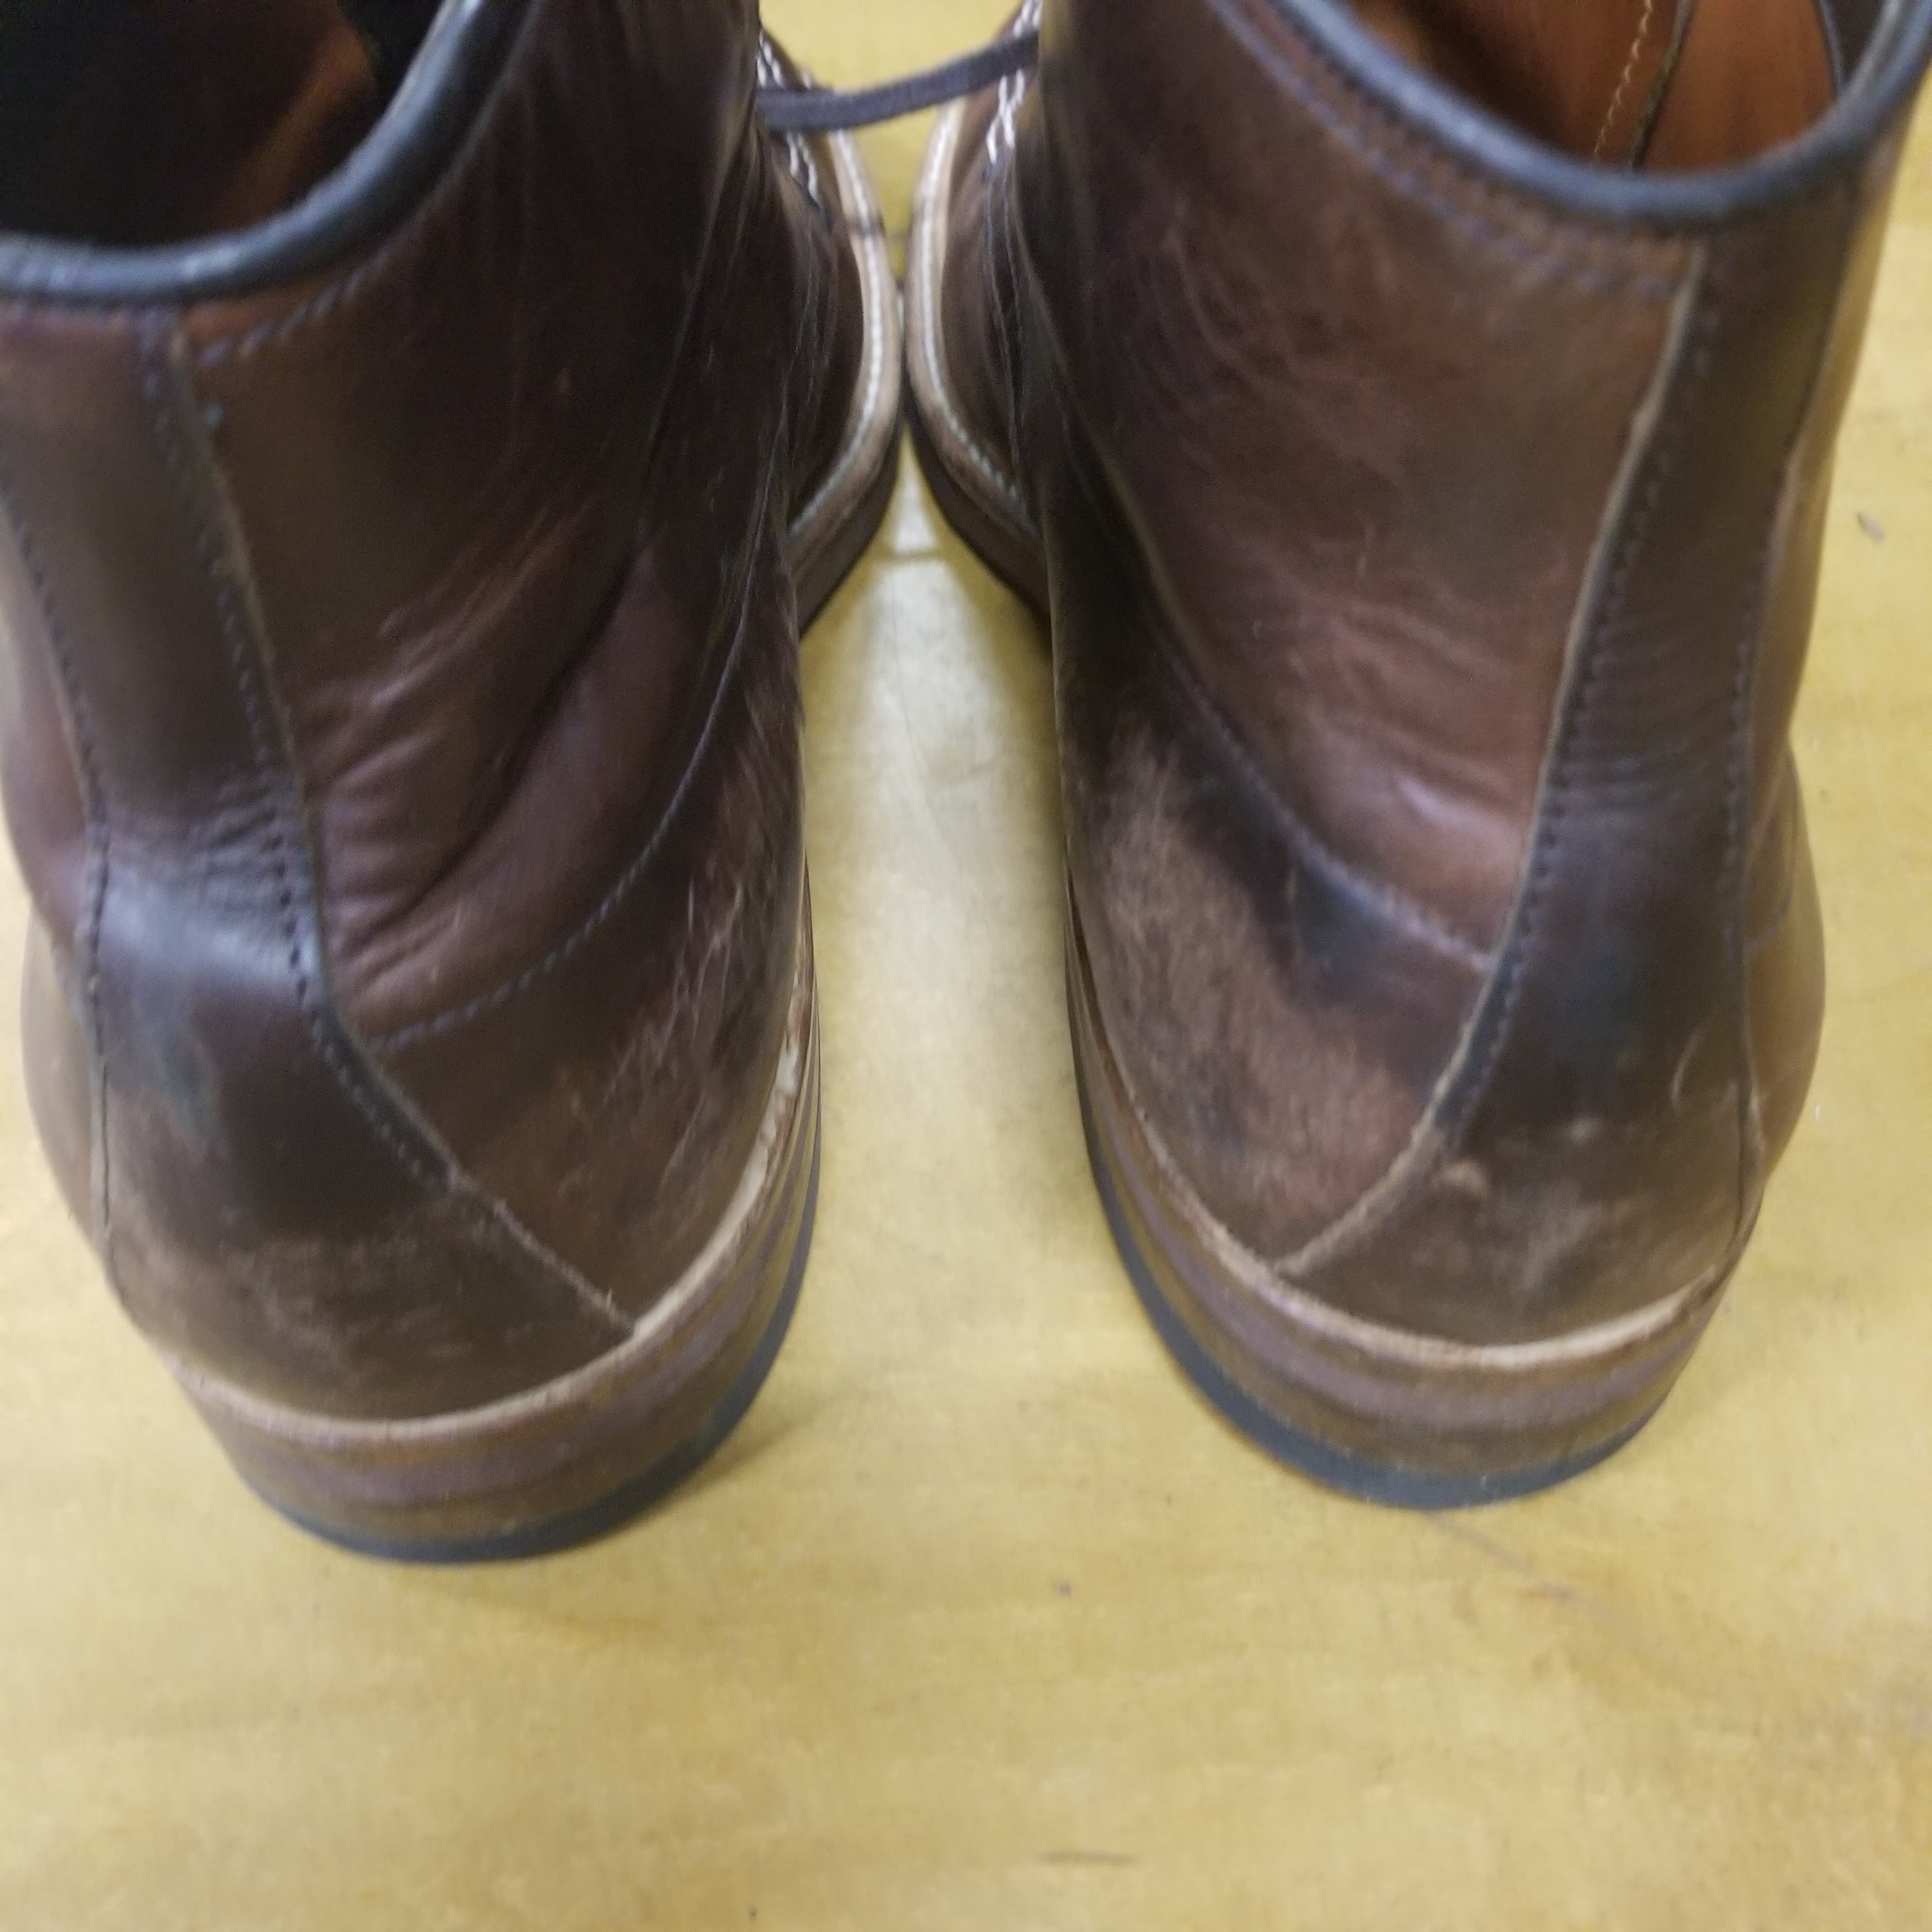 How to Care for Alden Shoes - 403 Indy Boots - Before